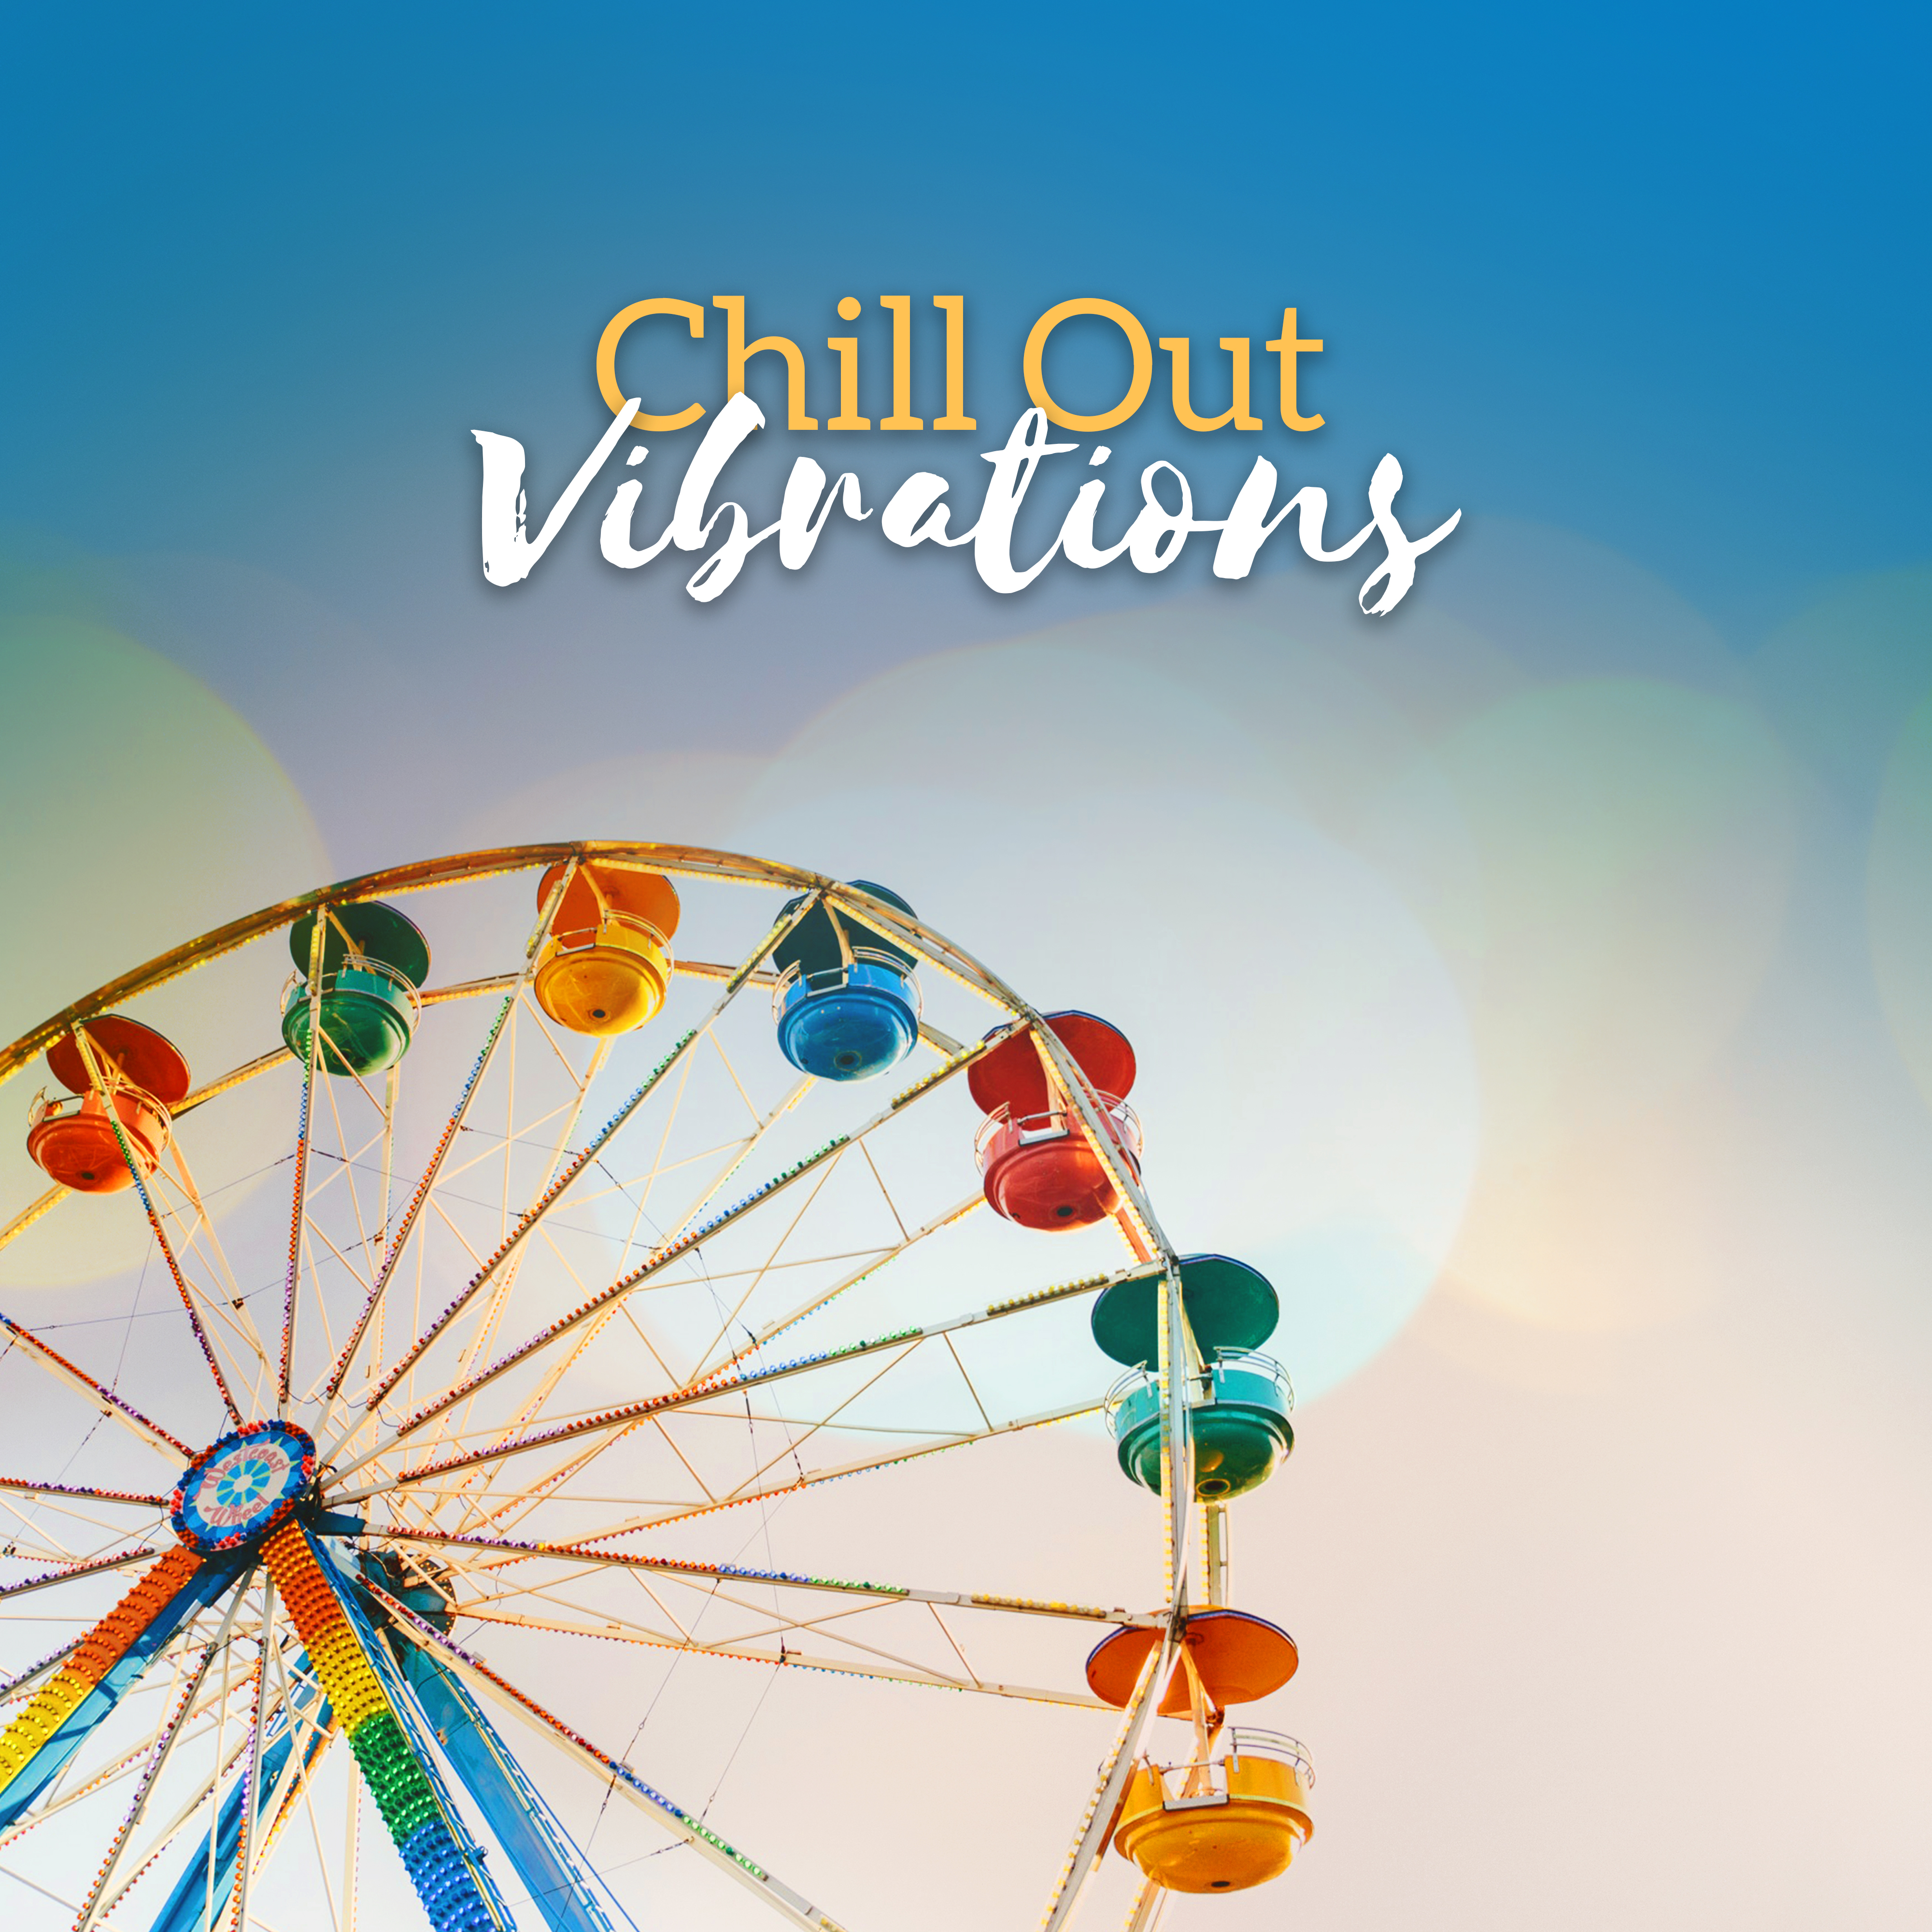 Chill Out Vibrations  Soft Chill Out Melodies, Summer Vibes, Holiday Music, Sunshine Sounds